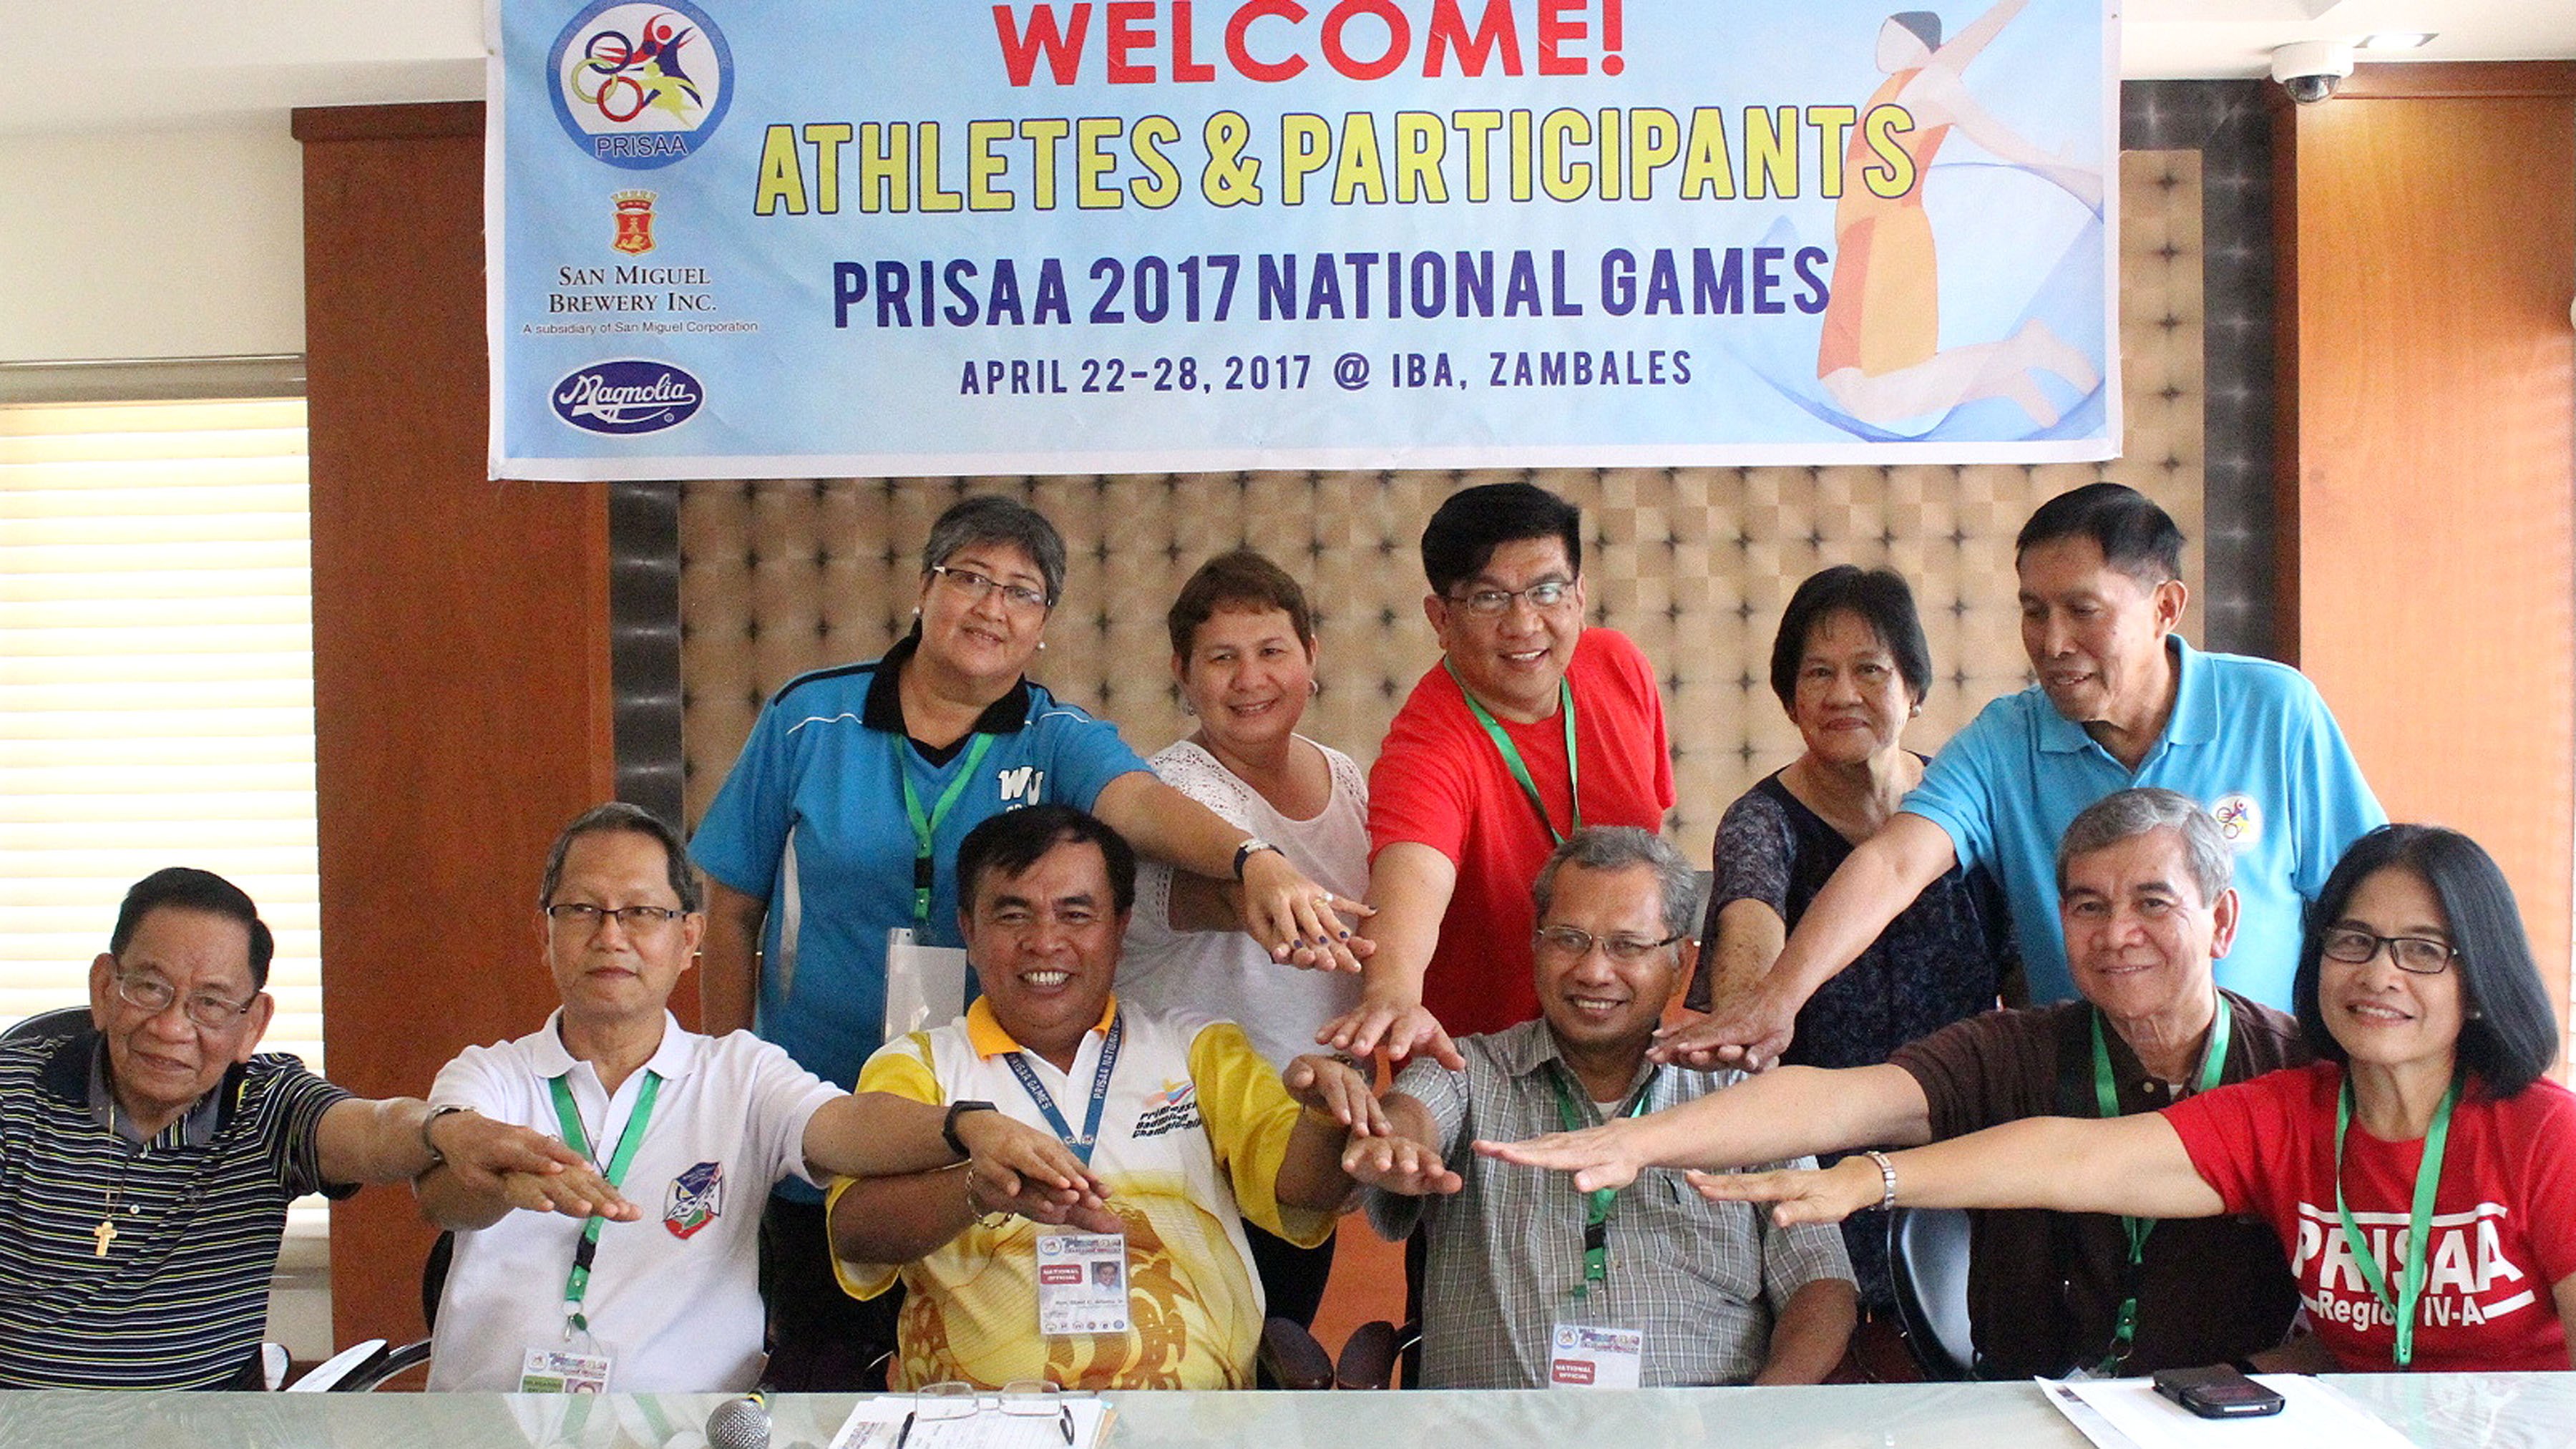 PRISAA officials join hands for unity